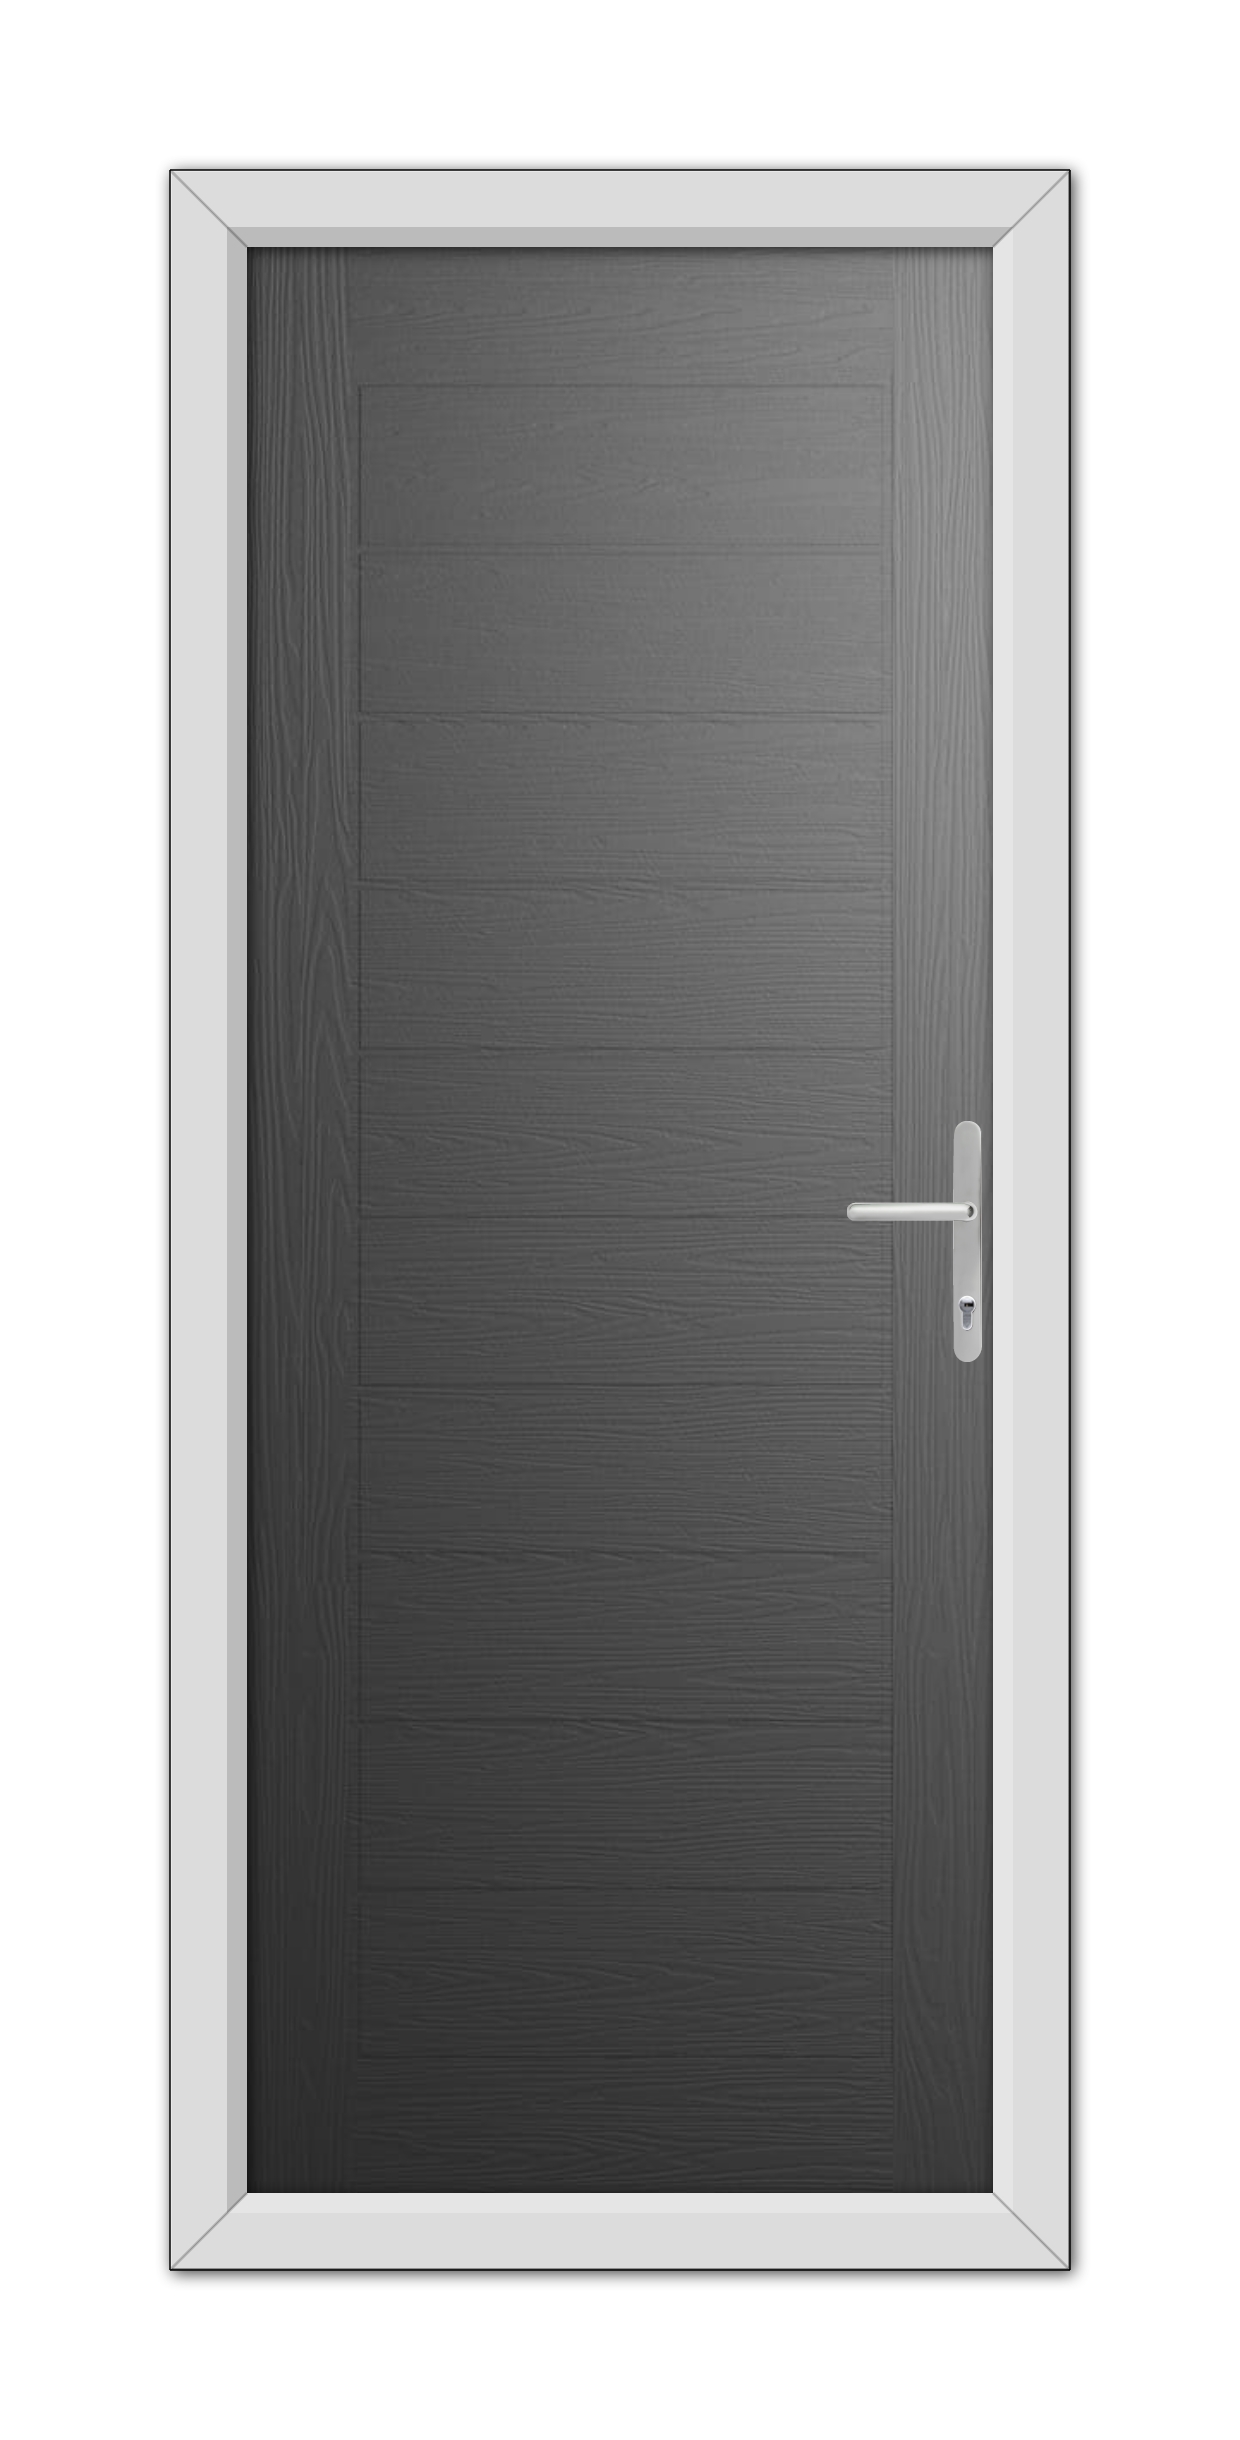 A closed modern Black Cambridge Composite Door 48mm Timber Core with a metallic handle, framed by a white border, isolated on a white background.